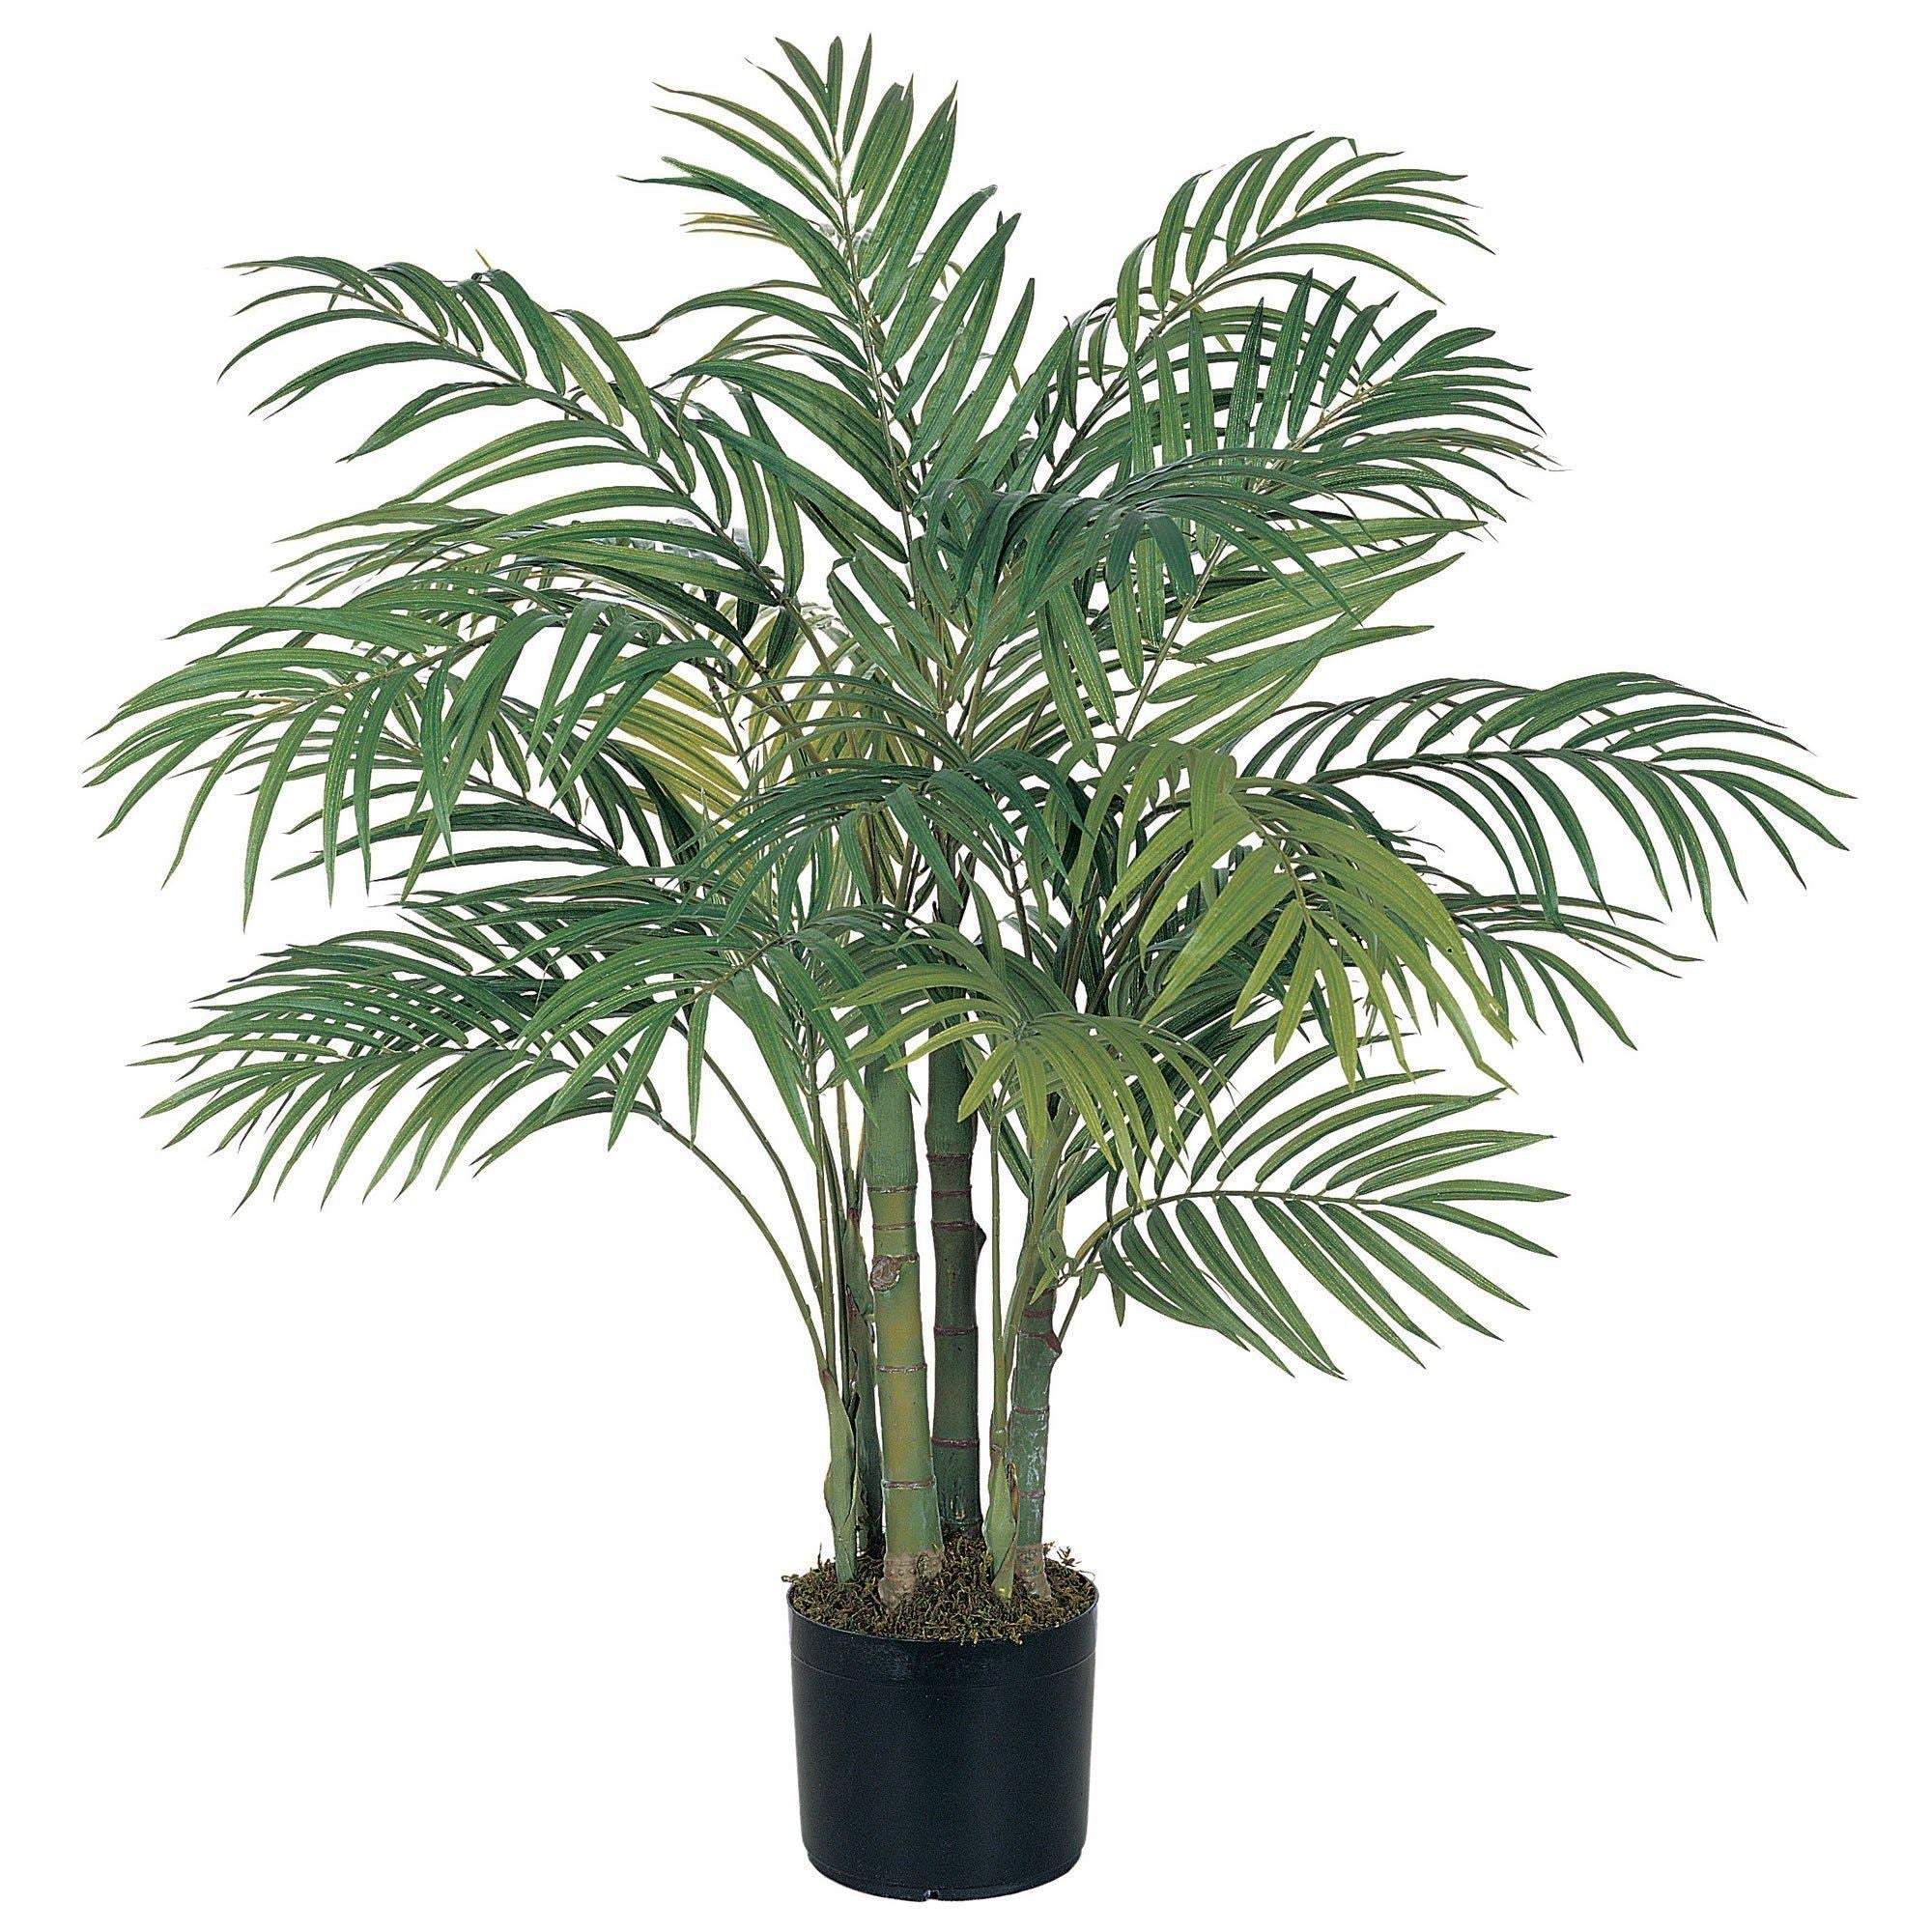 Artificial Tree - 3' Areca Silk Palm Tree by Nearly Natural